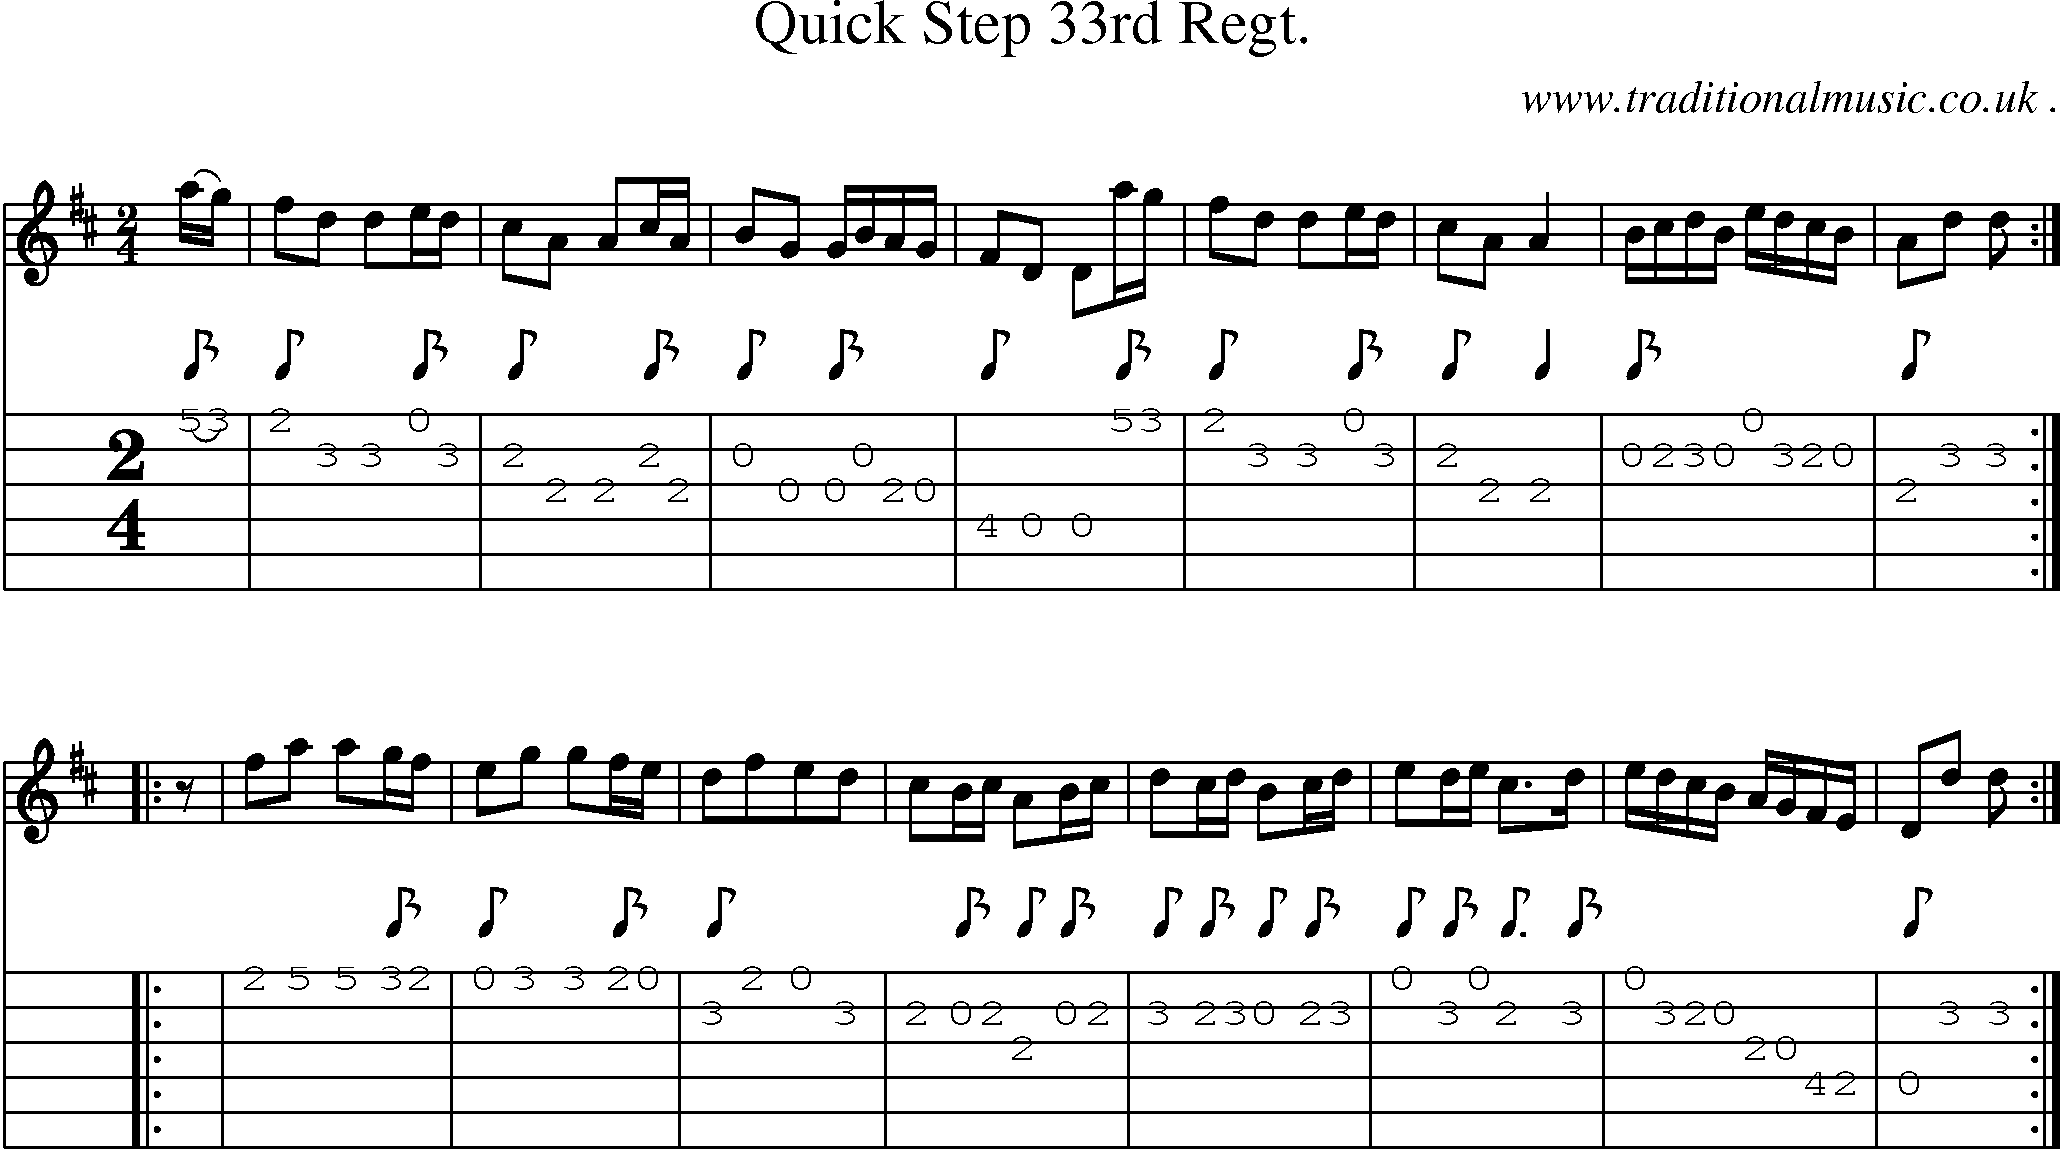 Sheet-music  score, Chords and Guitar Tabs for Quick Step 33rd Regt